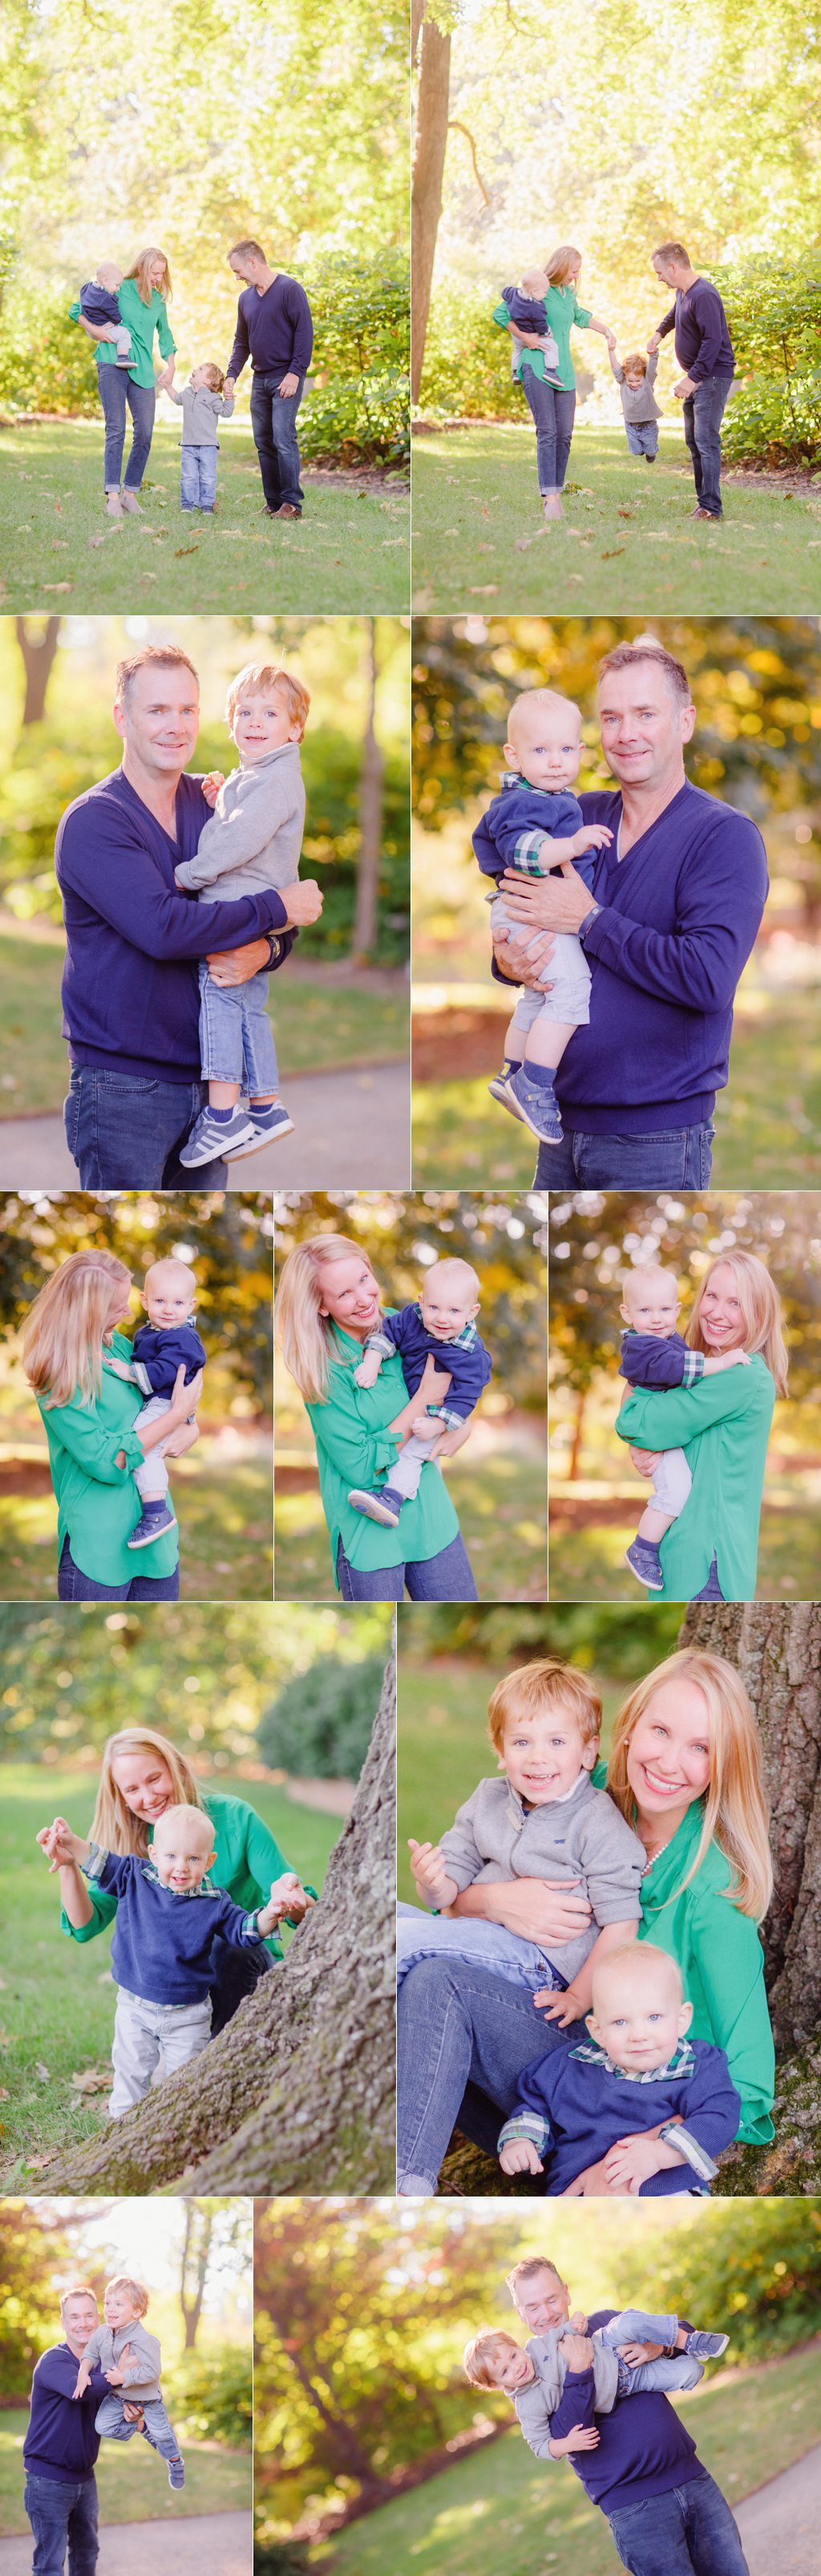 Athens, GA Fall family photo pictures